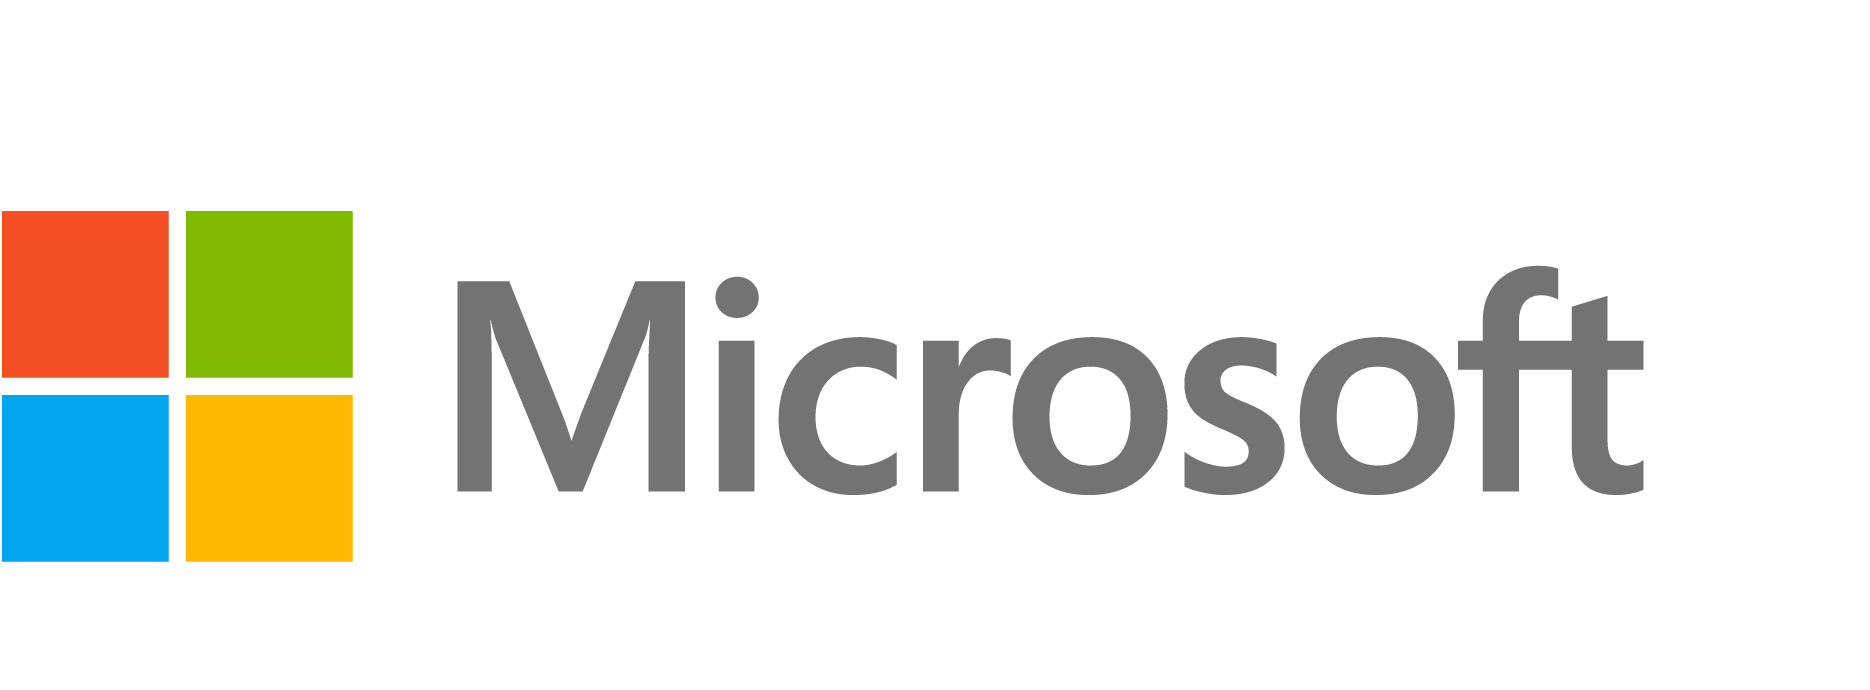 Msft Logo - Microsoft Build Shows A Very Intriguing Path Corporation